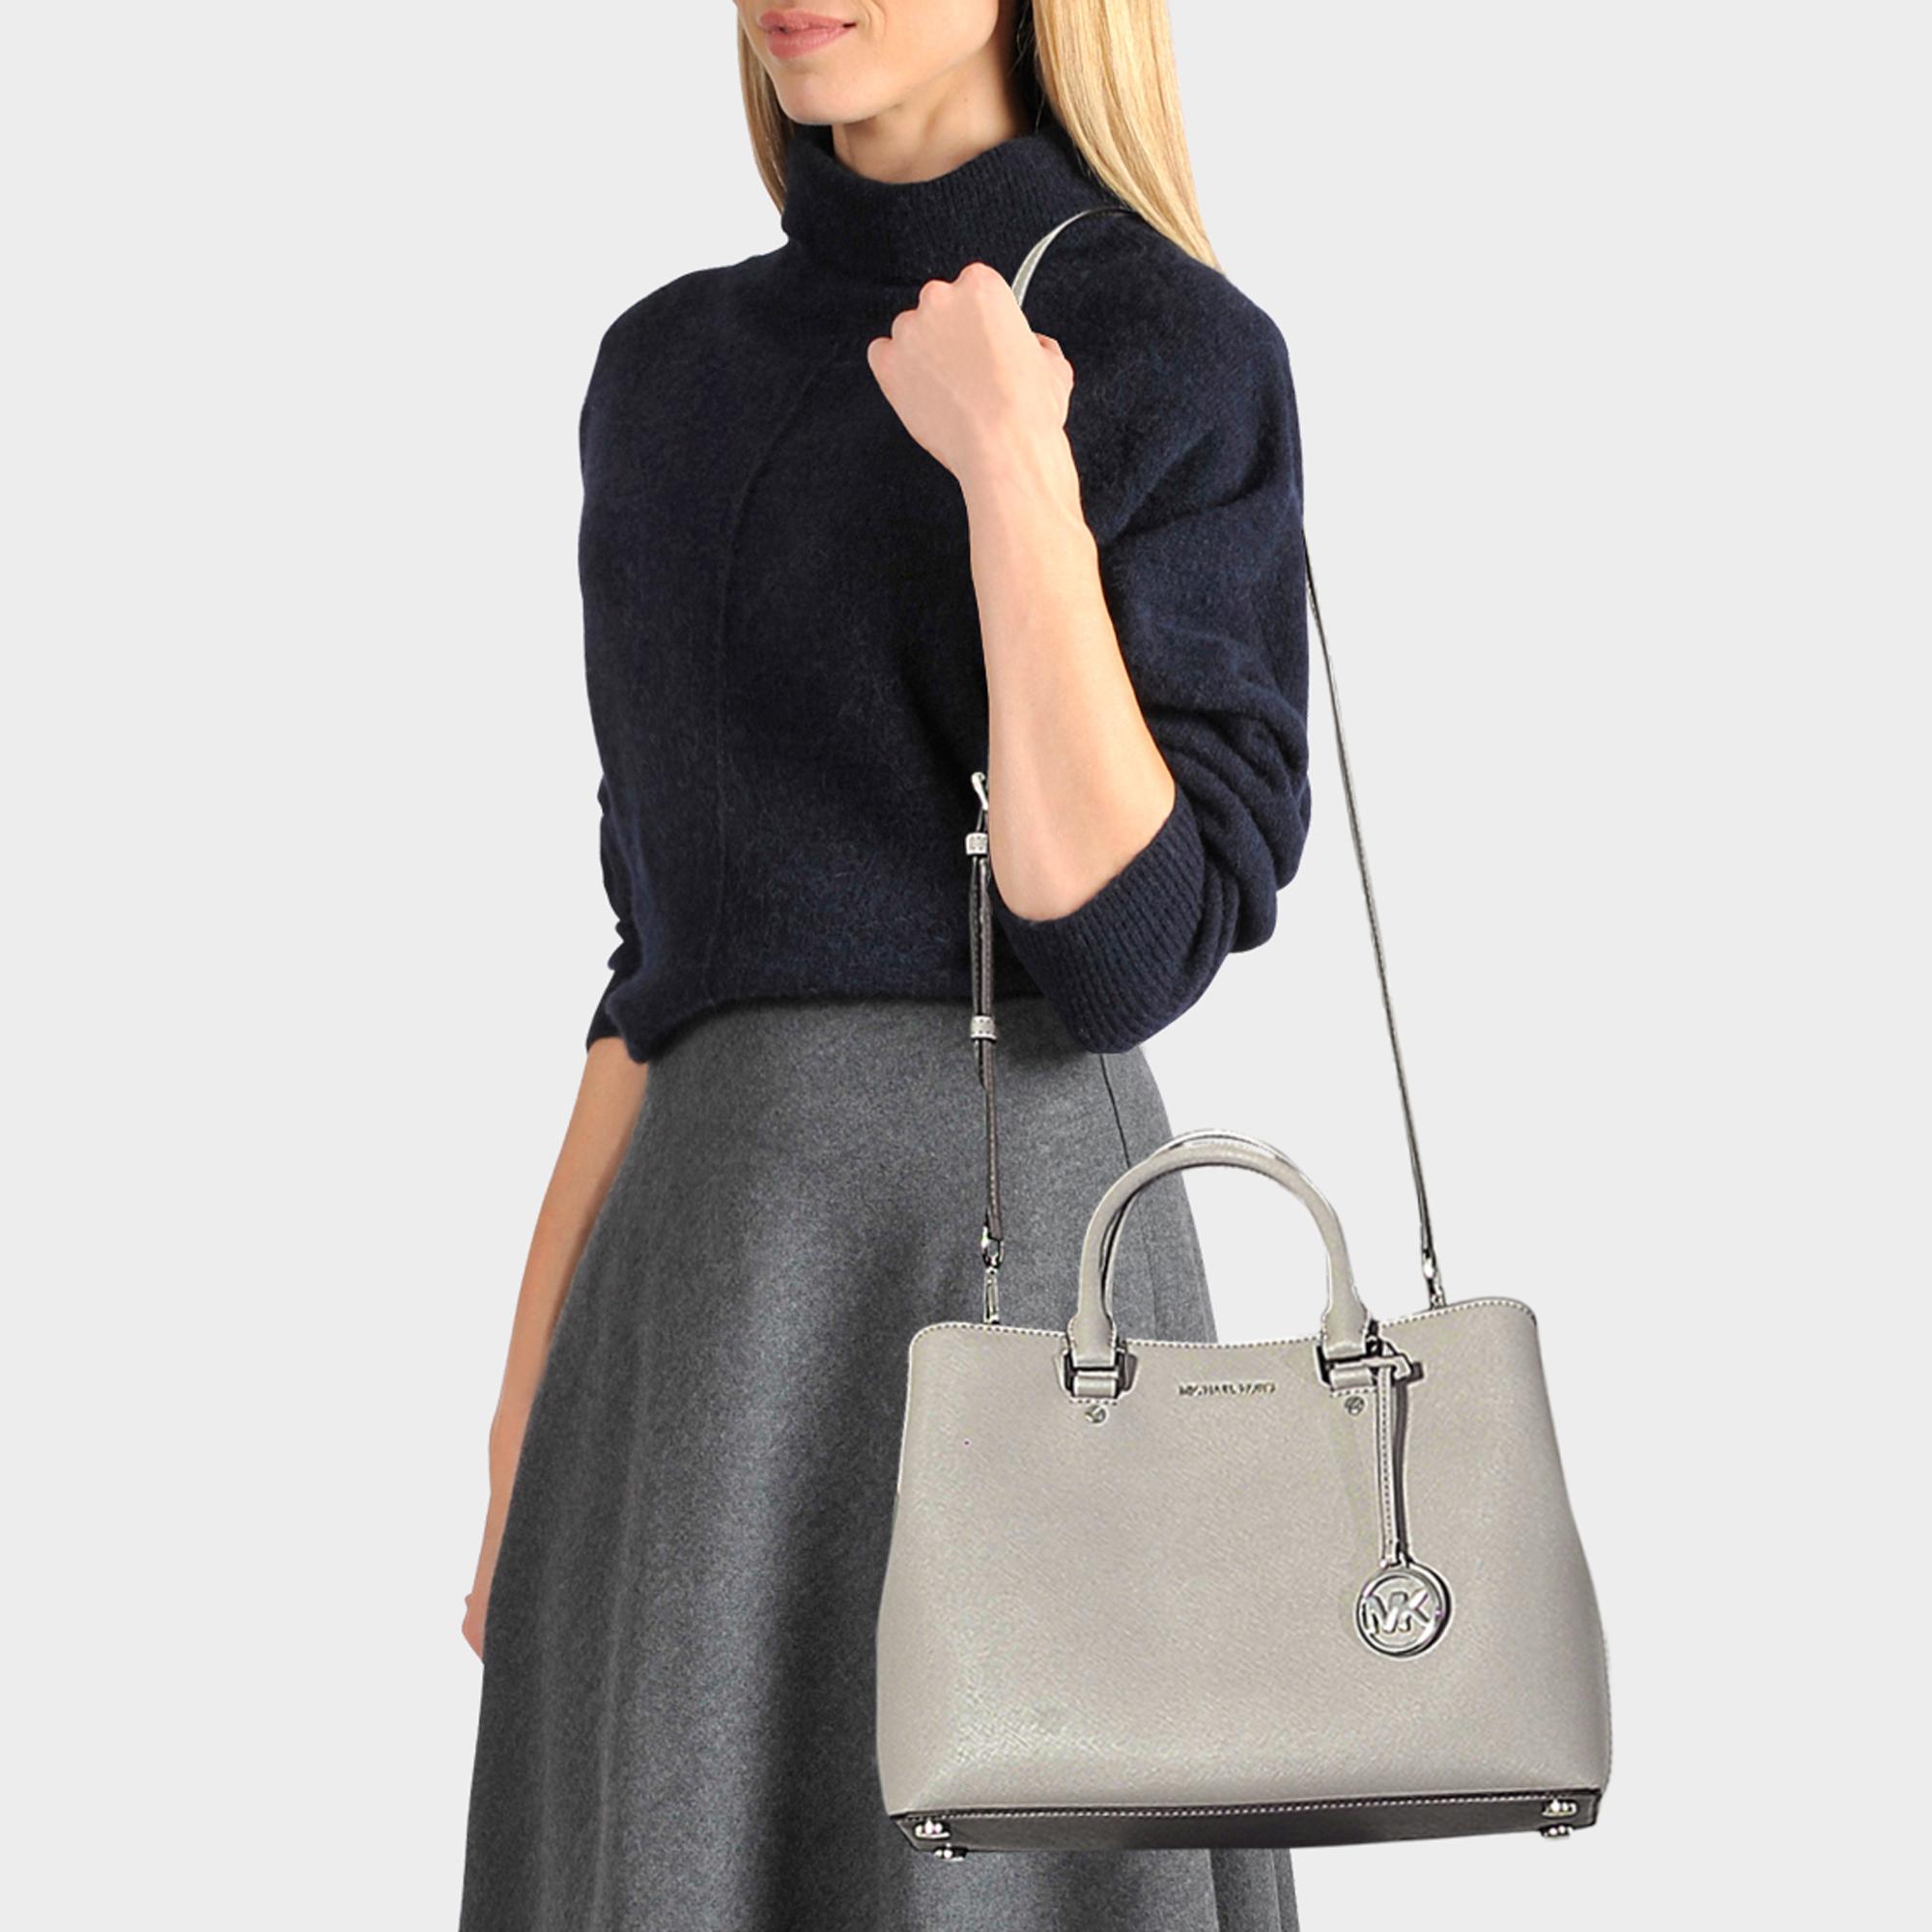 MICHAEL Kors Savannah Large Satchel Bag In Pearl Saffia Leather in Gray - Lyst